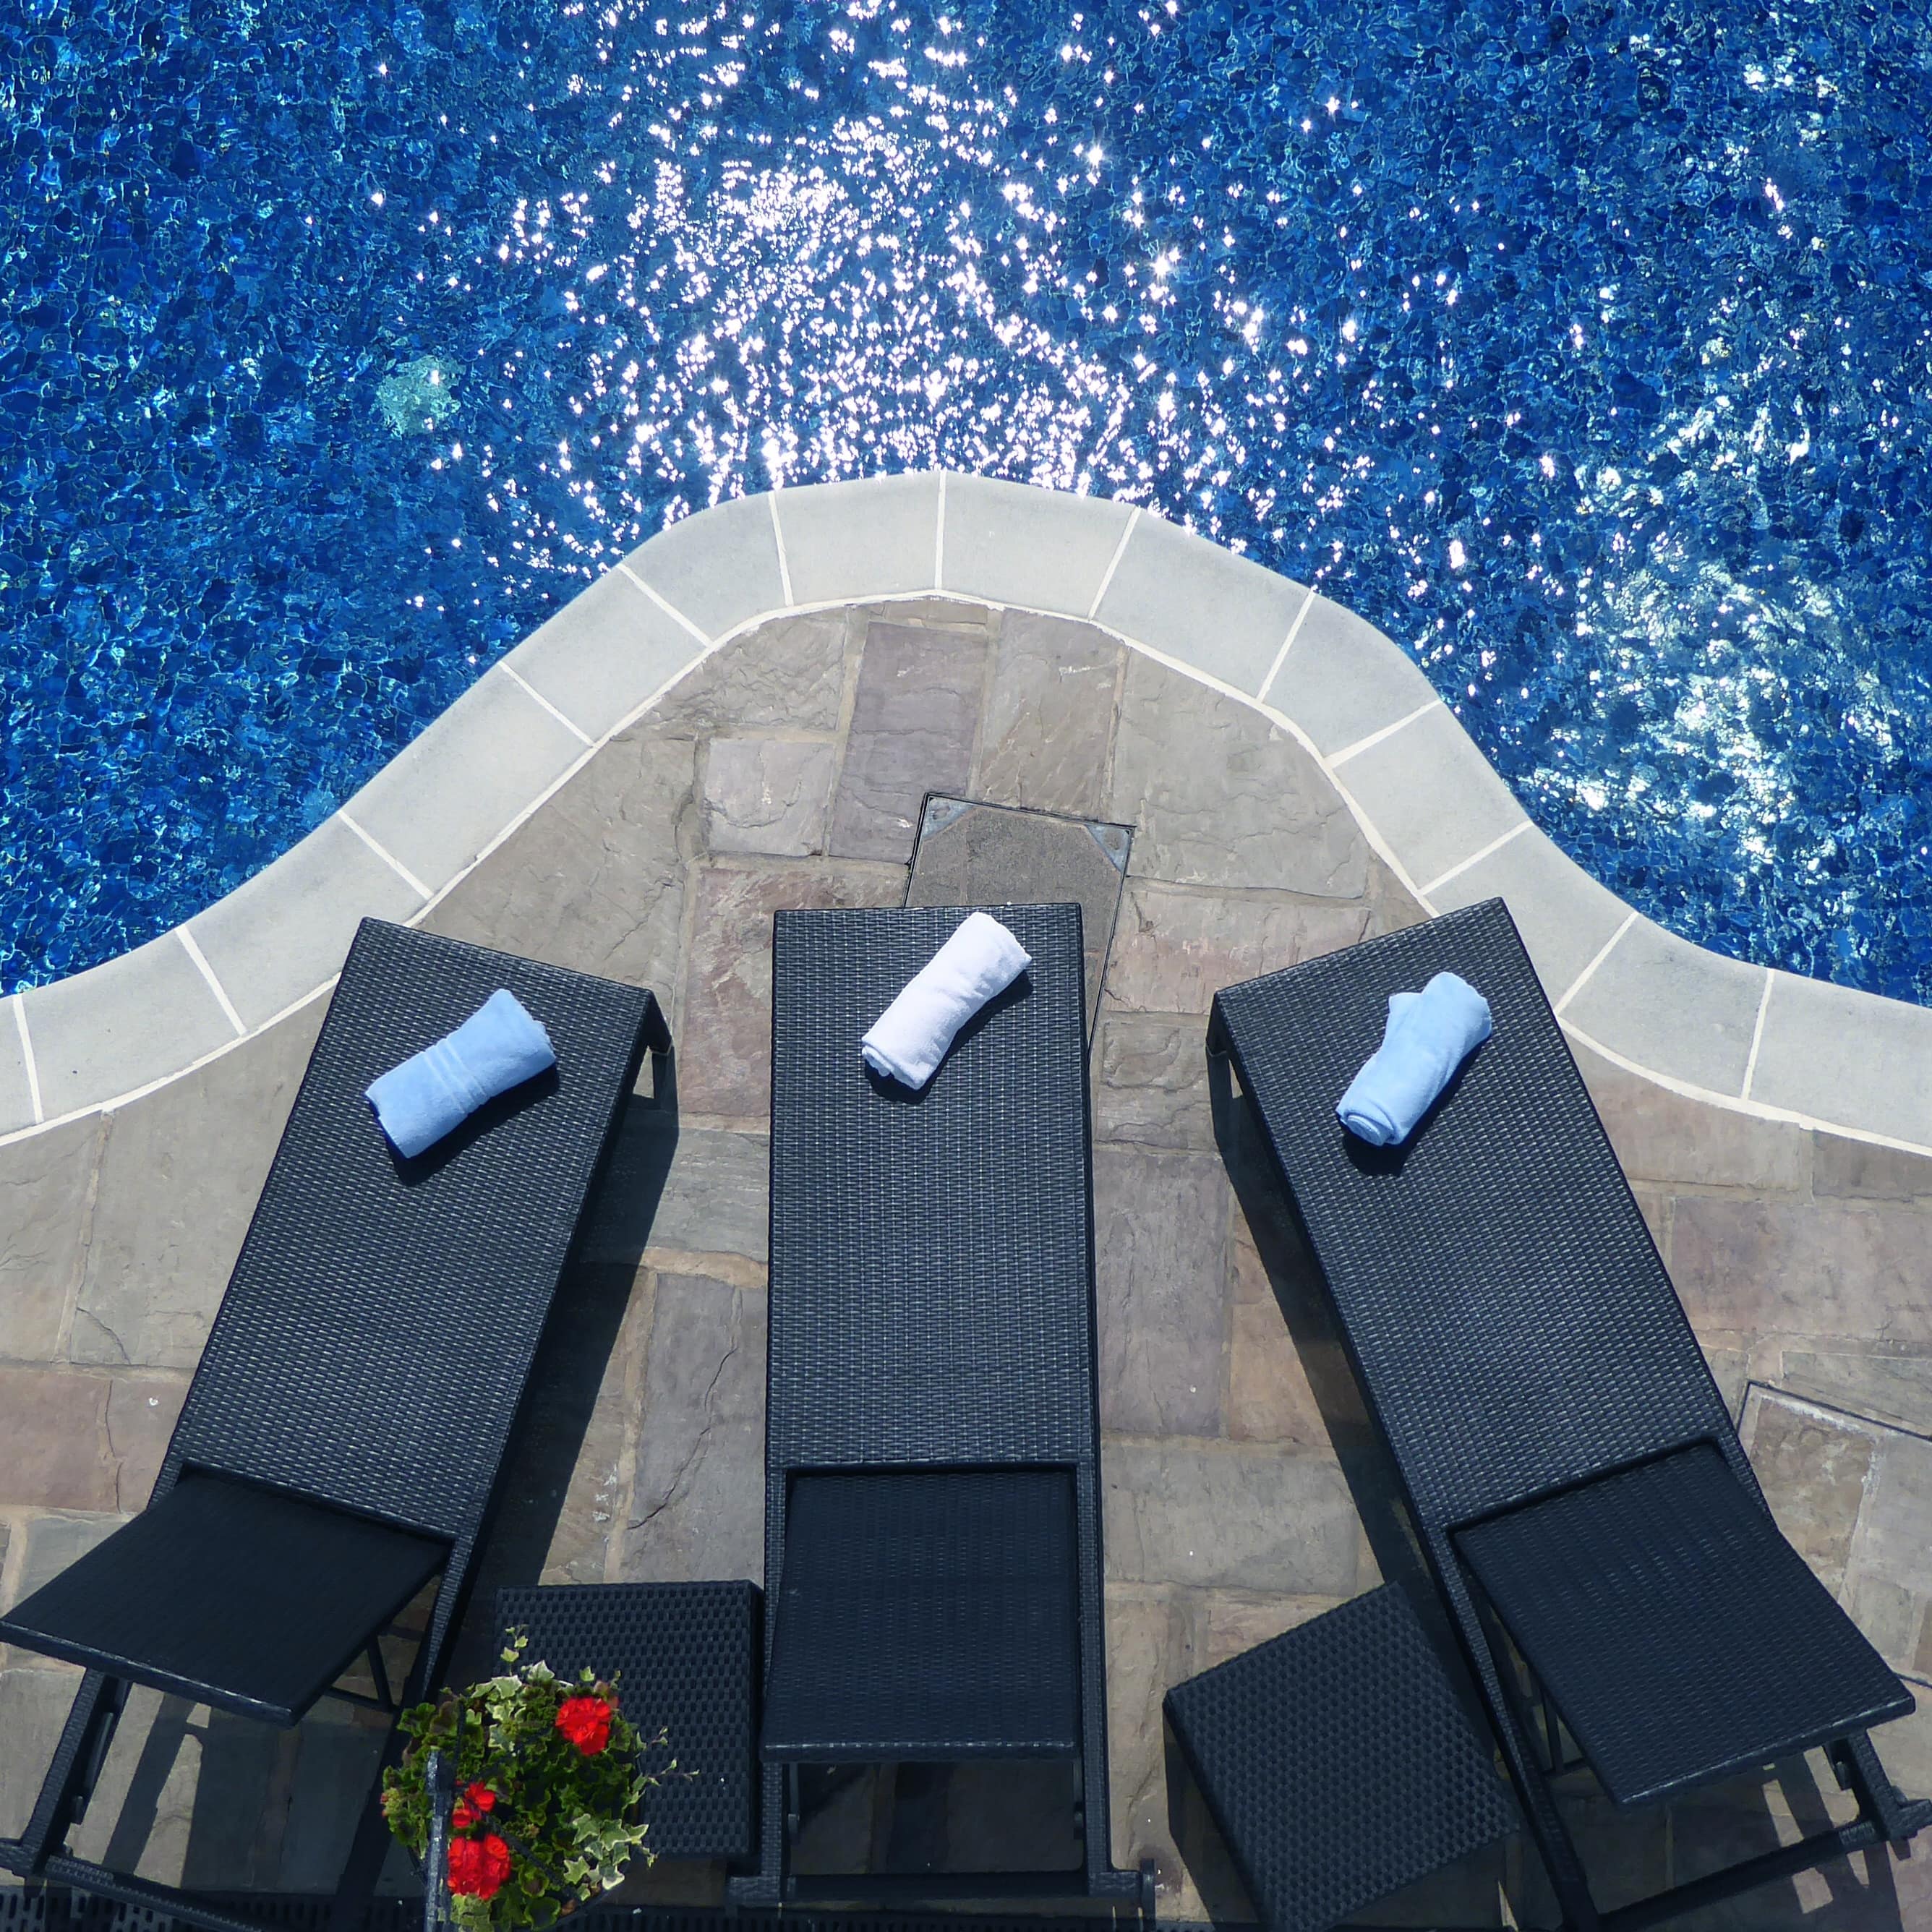 Aeriel view of 3 pool loungers sitting next to a sparkling blue pool